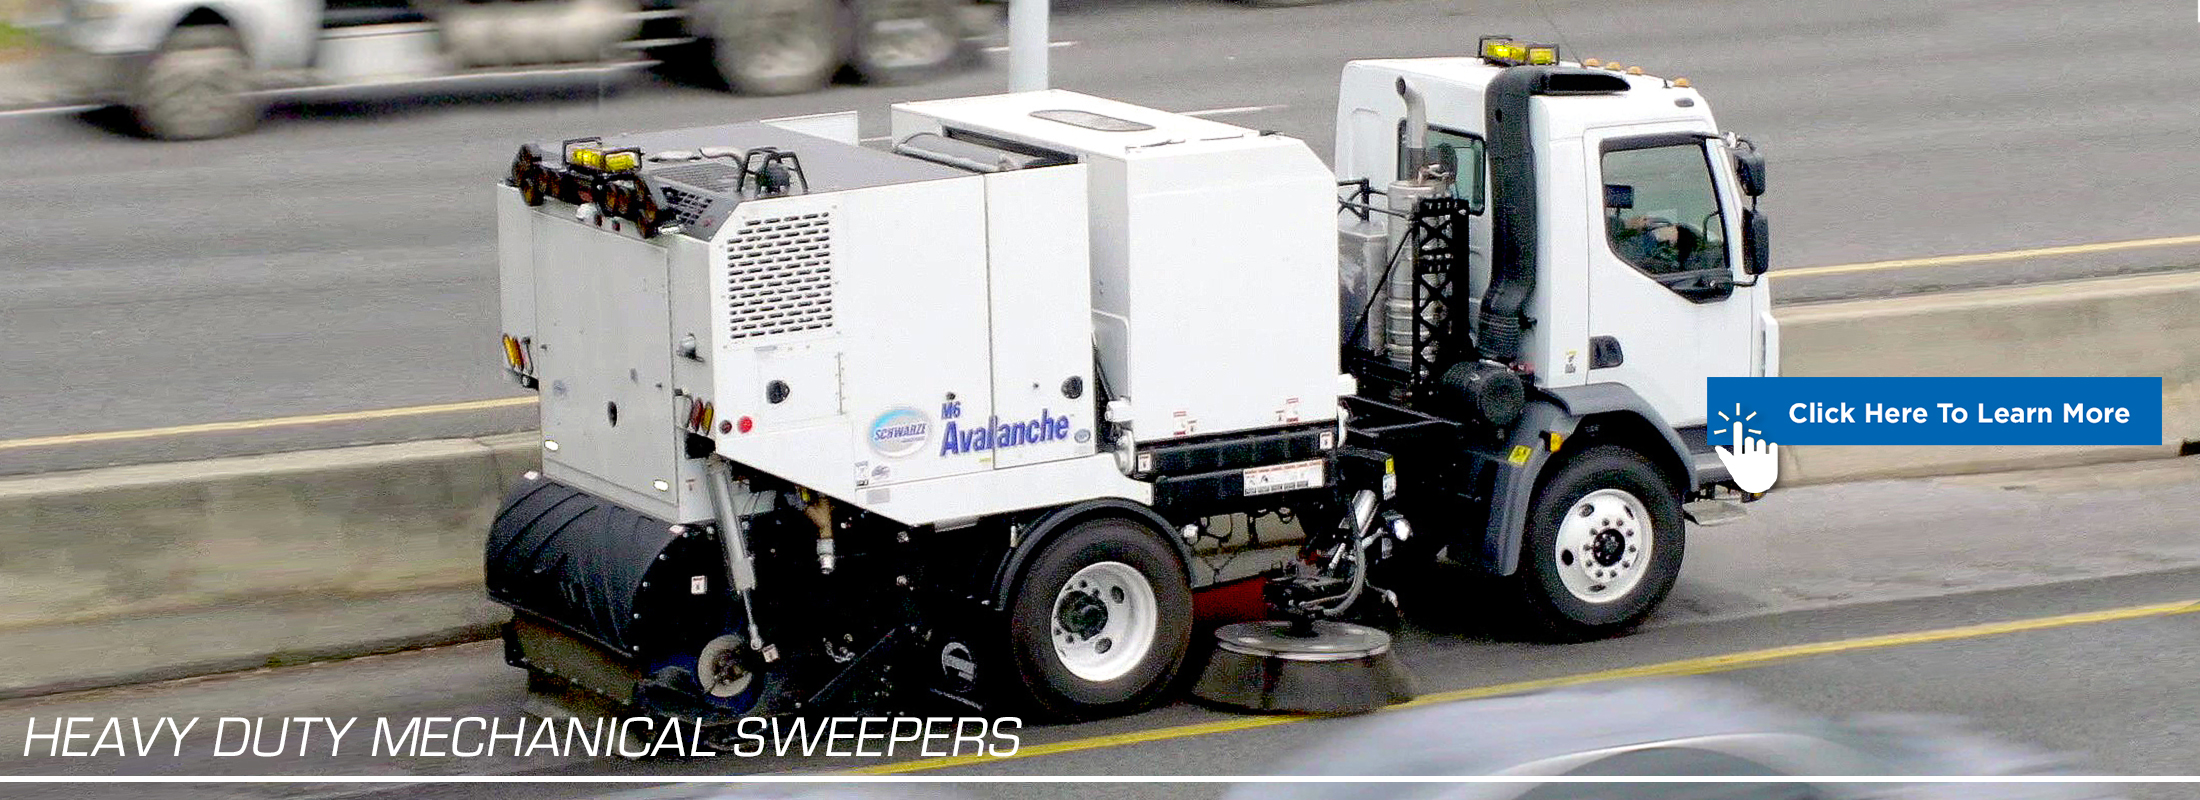 Heavy Duty Mechanical Sweepers Banner Image